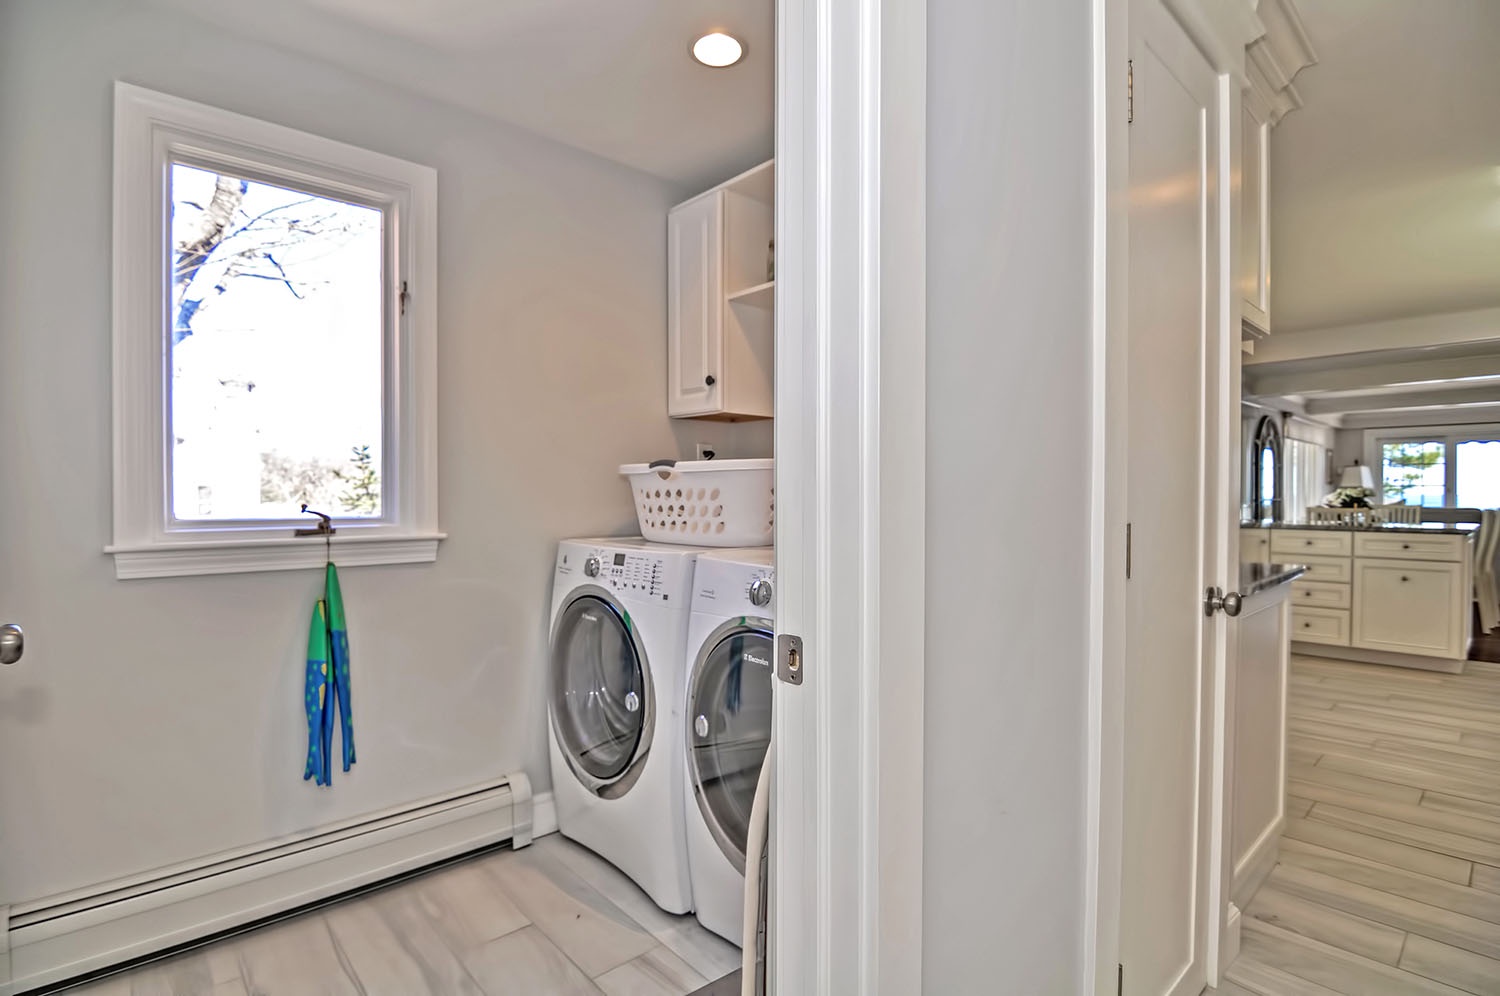 The laundry room is just off the kitchen.